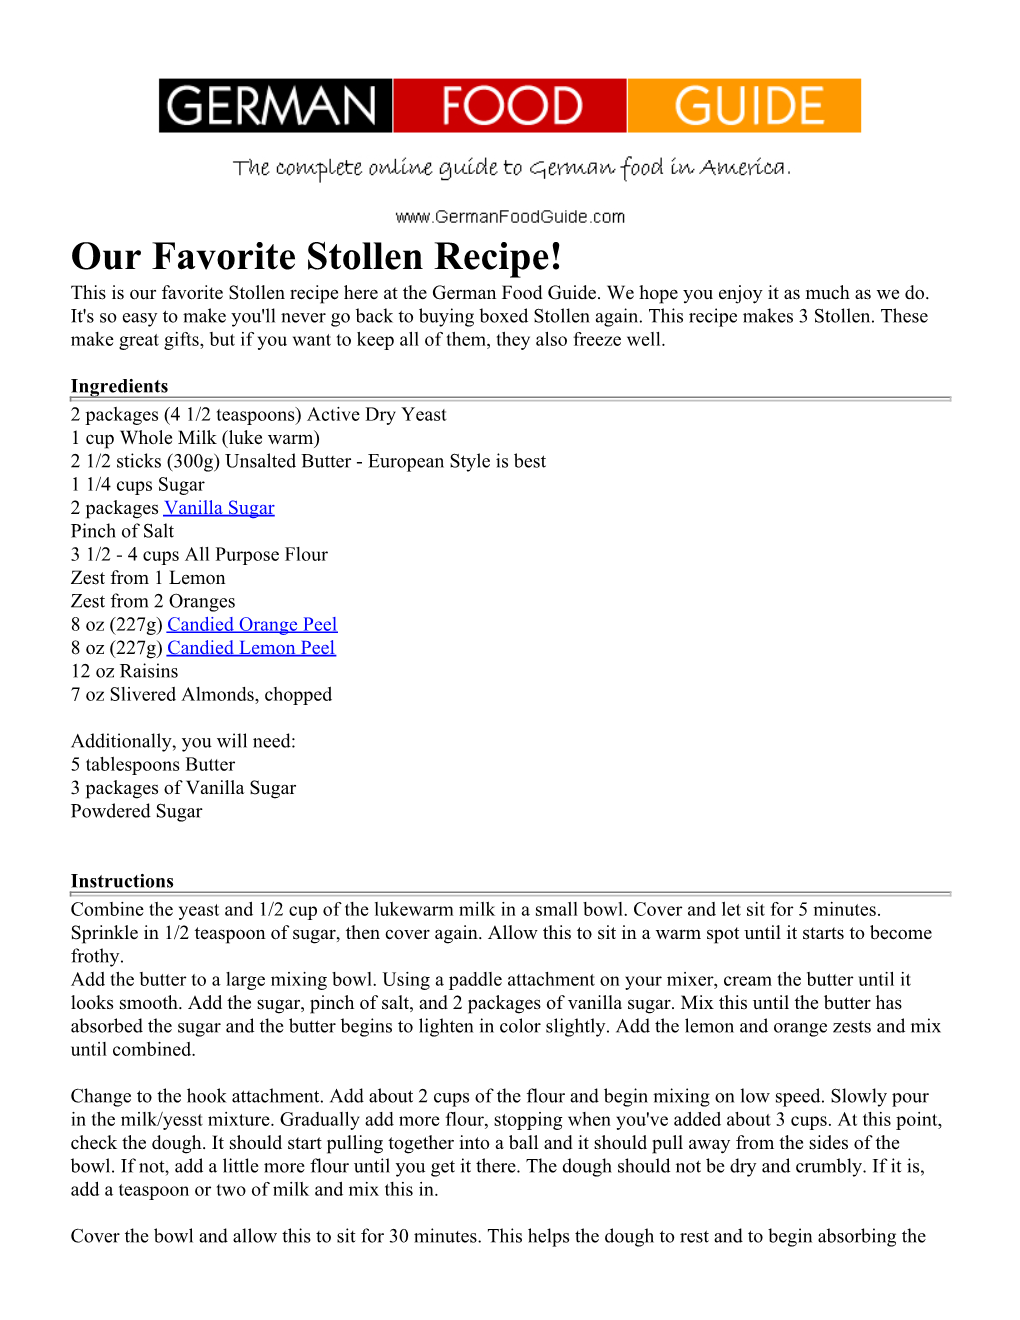 Our Favorite Stollen Recipe! This Is Our Favorite Stollen Recipe Here at the German Food Guide